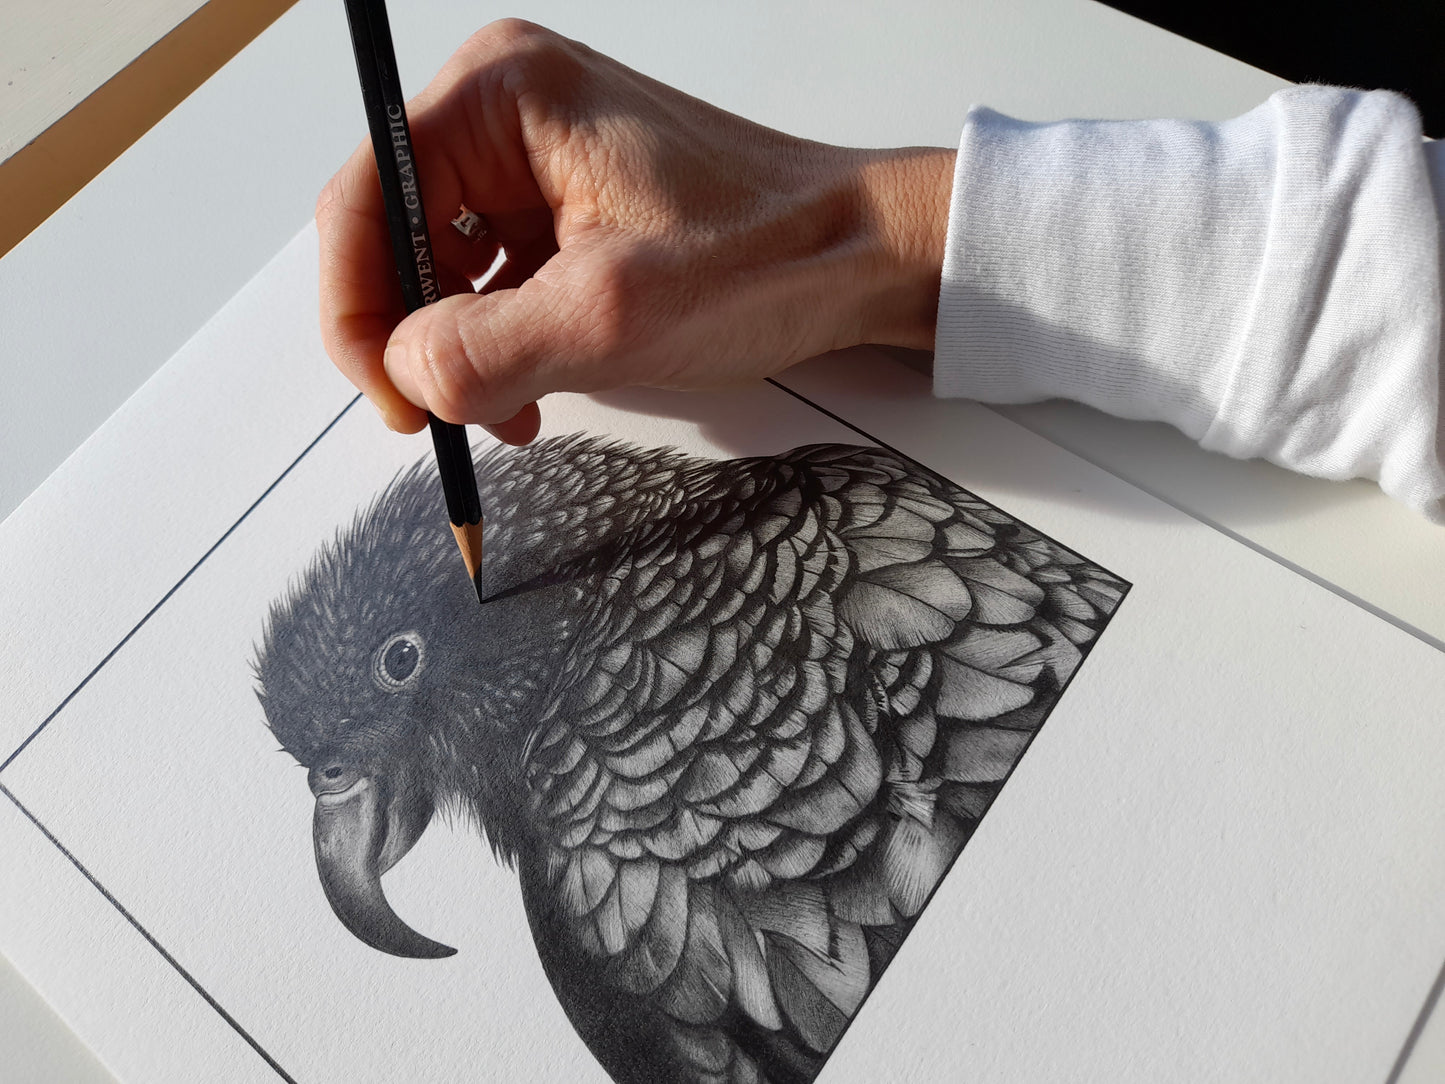 Oh, Hello There - Kea - Limited Edition A4 Giclee Print